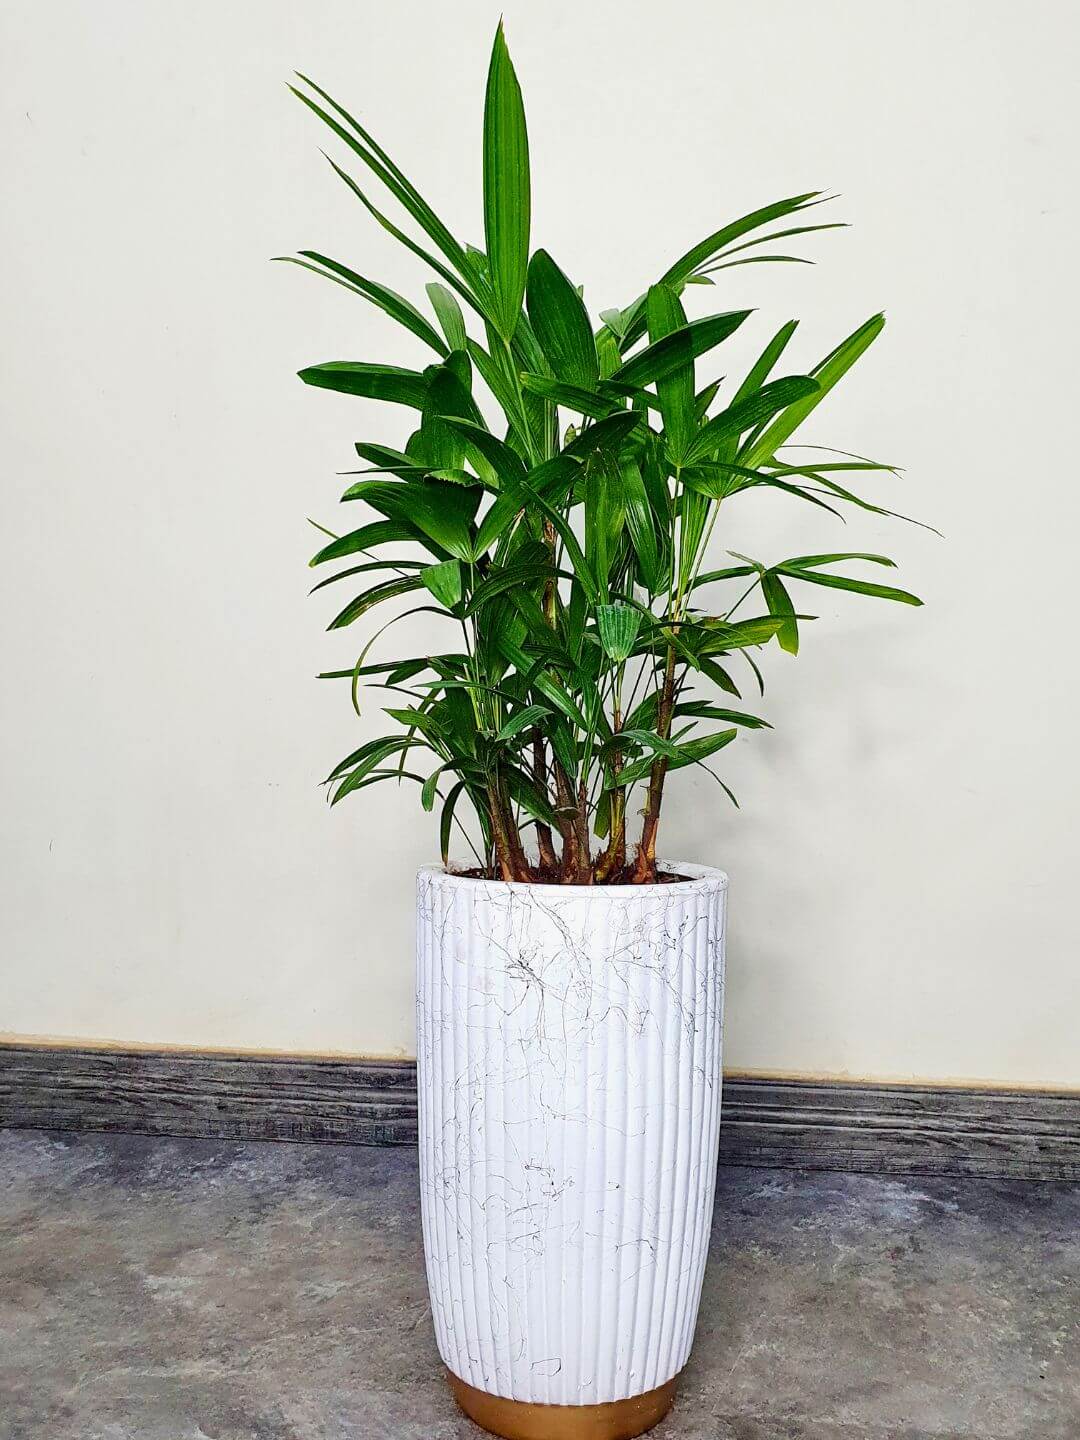 Potted Lady Palm or Rhapis Plant 100-120 cm Planted in Ceramic Pot White Finished